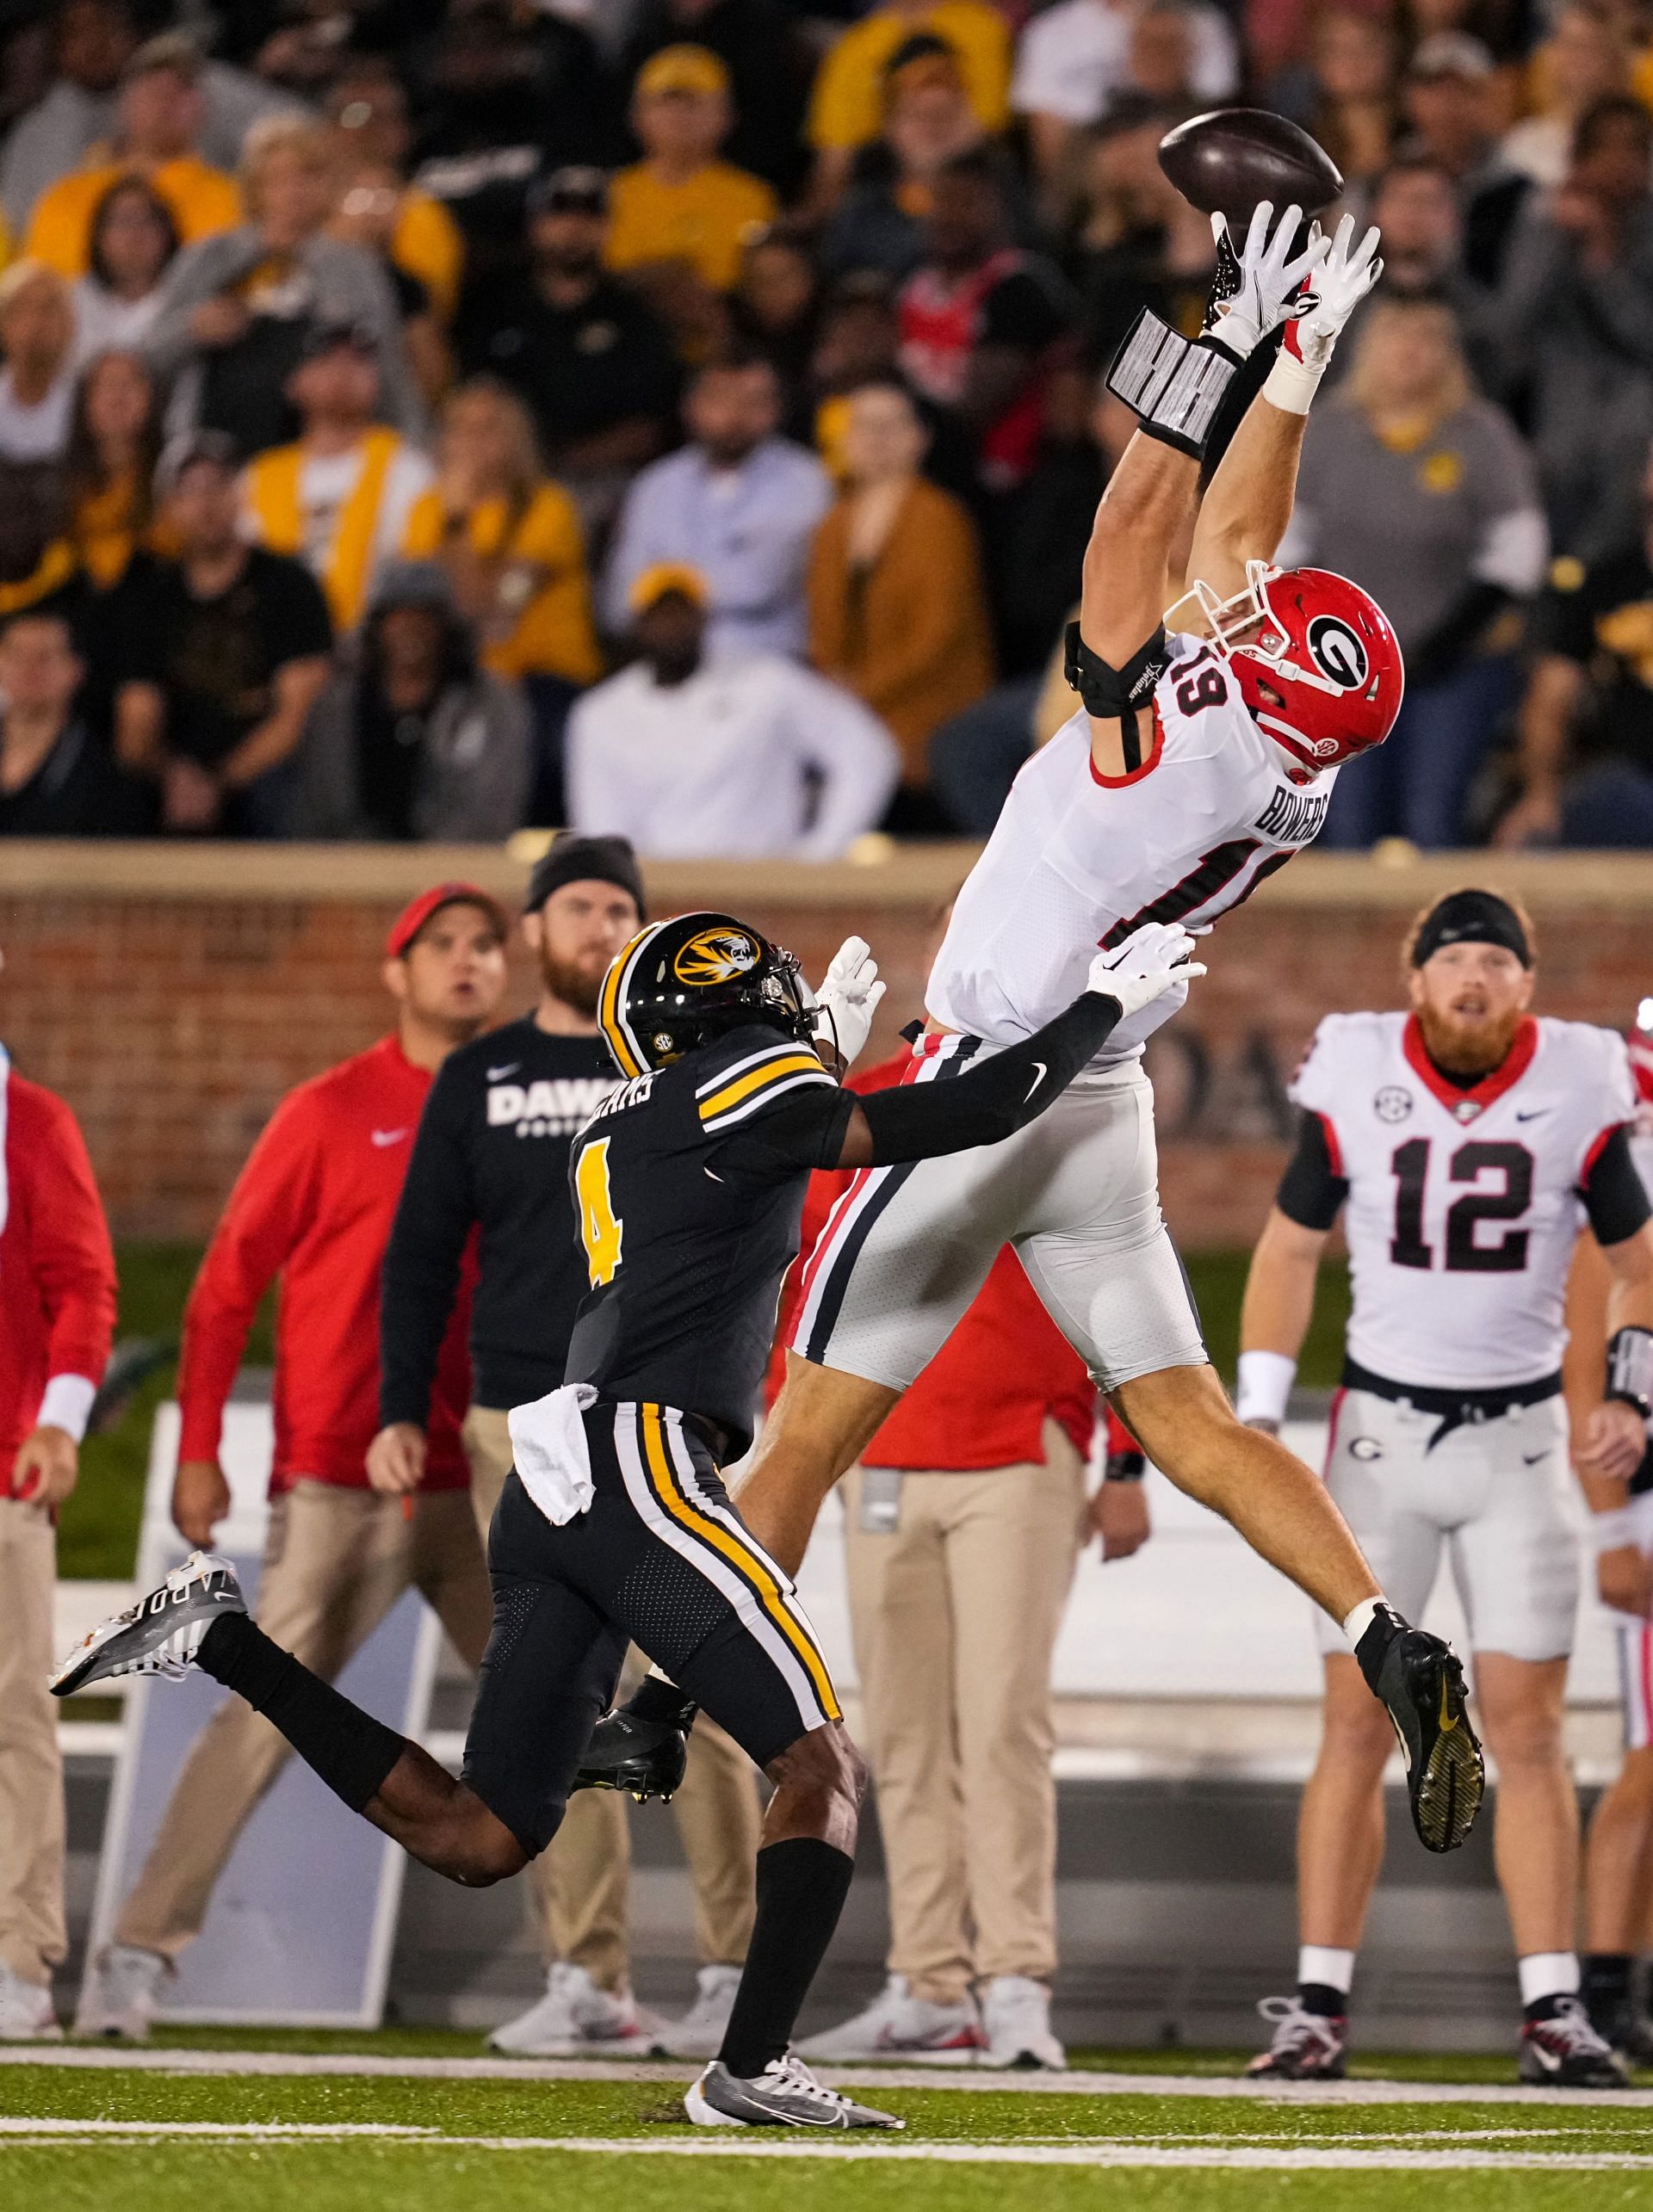 Georgia Bulldogs 2023 Schedule Opponent Mizzou Tigers are always a great game